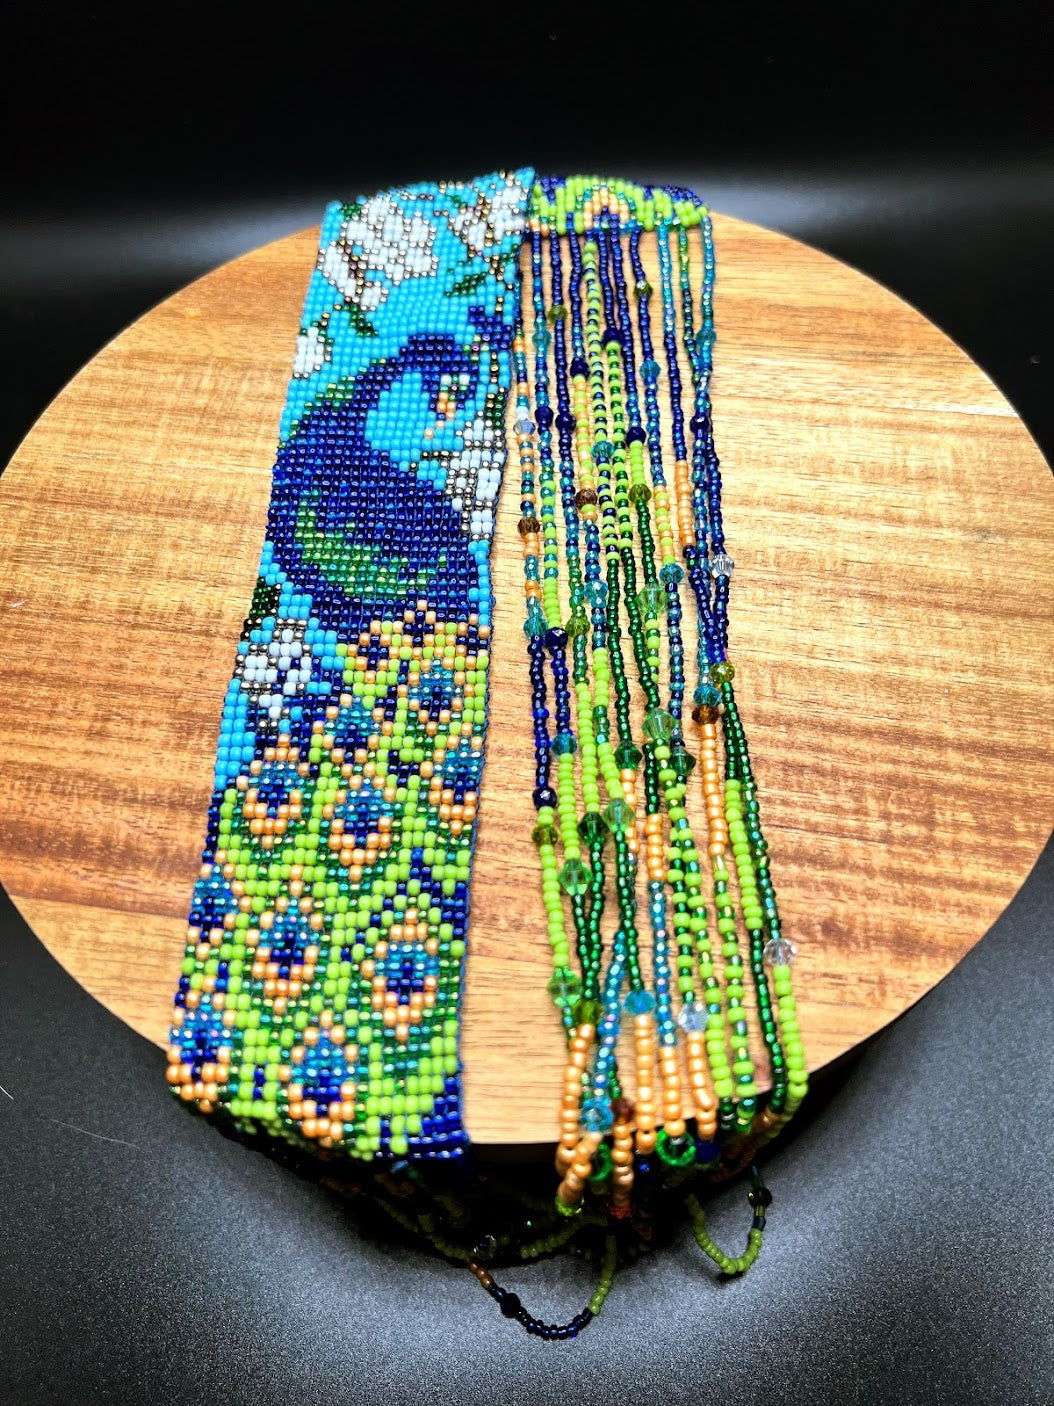 Blue Peacock Design Loom Beaded Necklaces